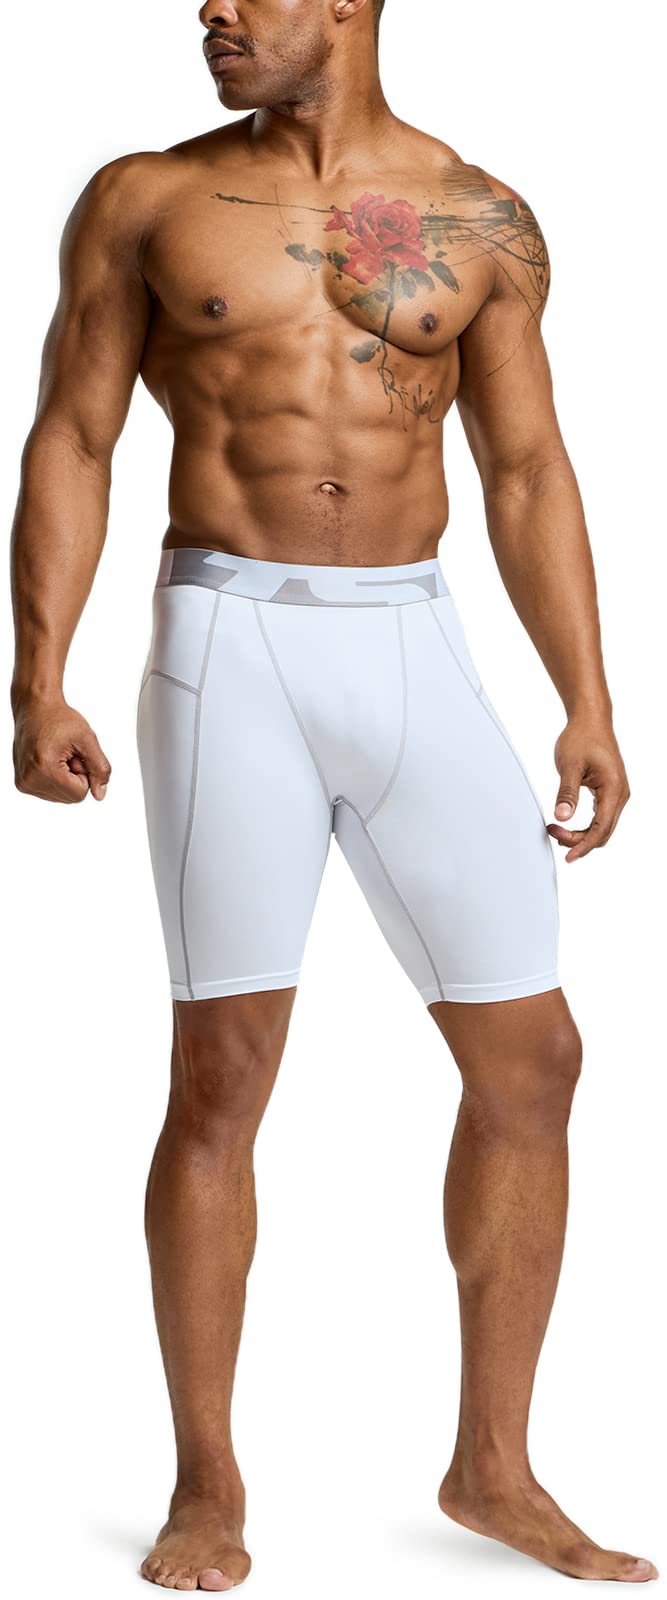 TSLA Men's Athletic Compression Shorts, Sports Performance Active Cool Dry Running Tights